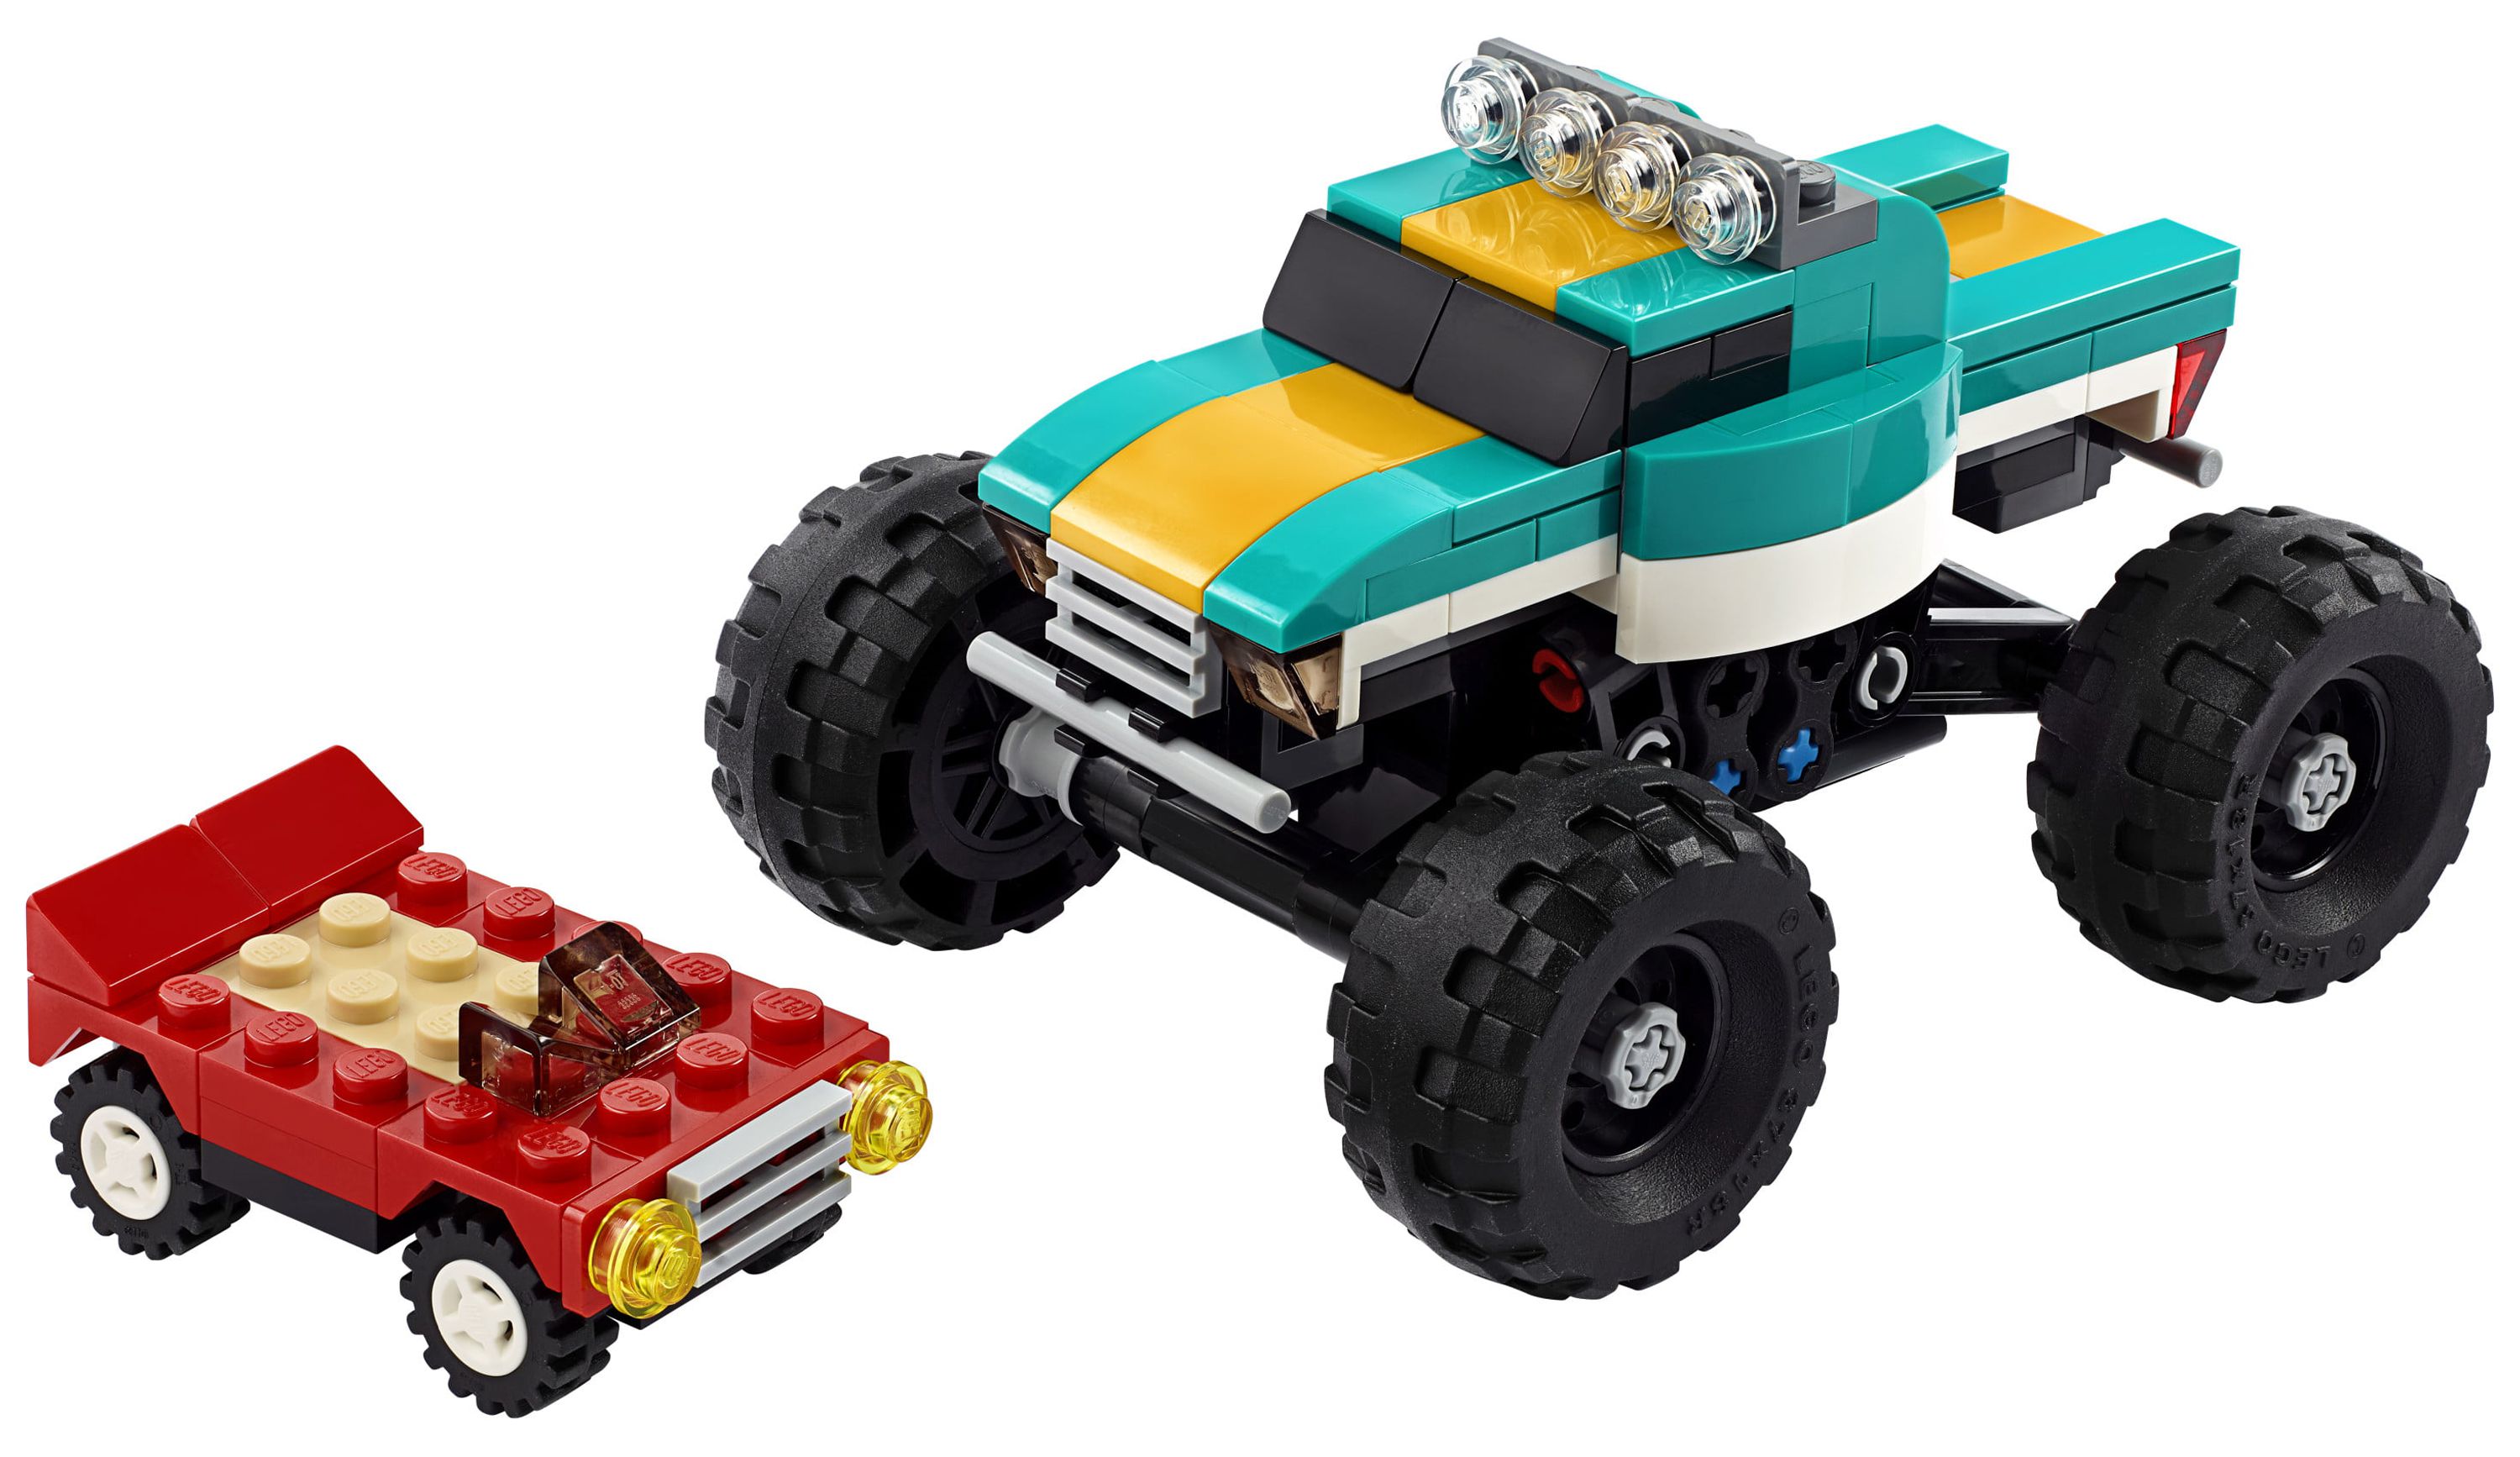 LEGO Creator 3in1 Monster Truck Toy 31101 Cool Building Kit for Kids (163 Pieces) - image 3 of 11